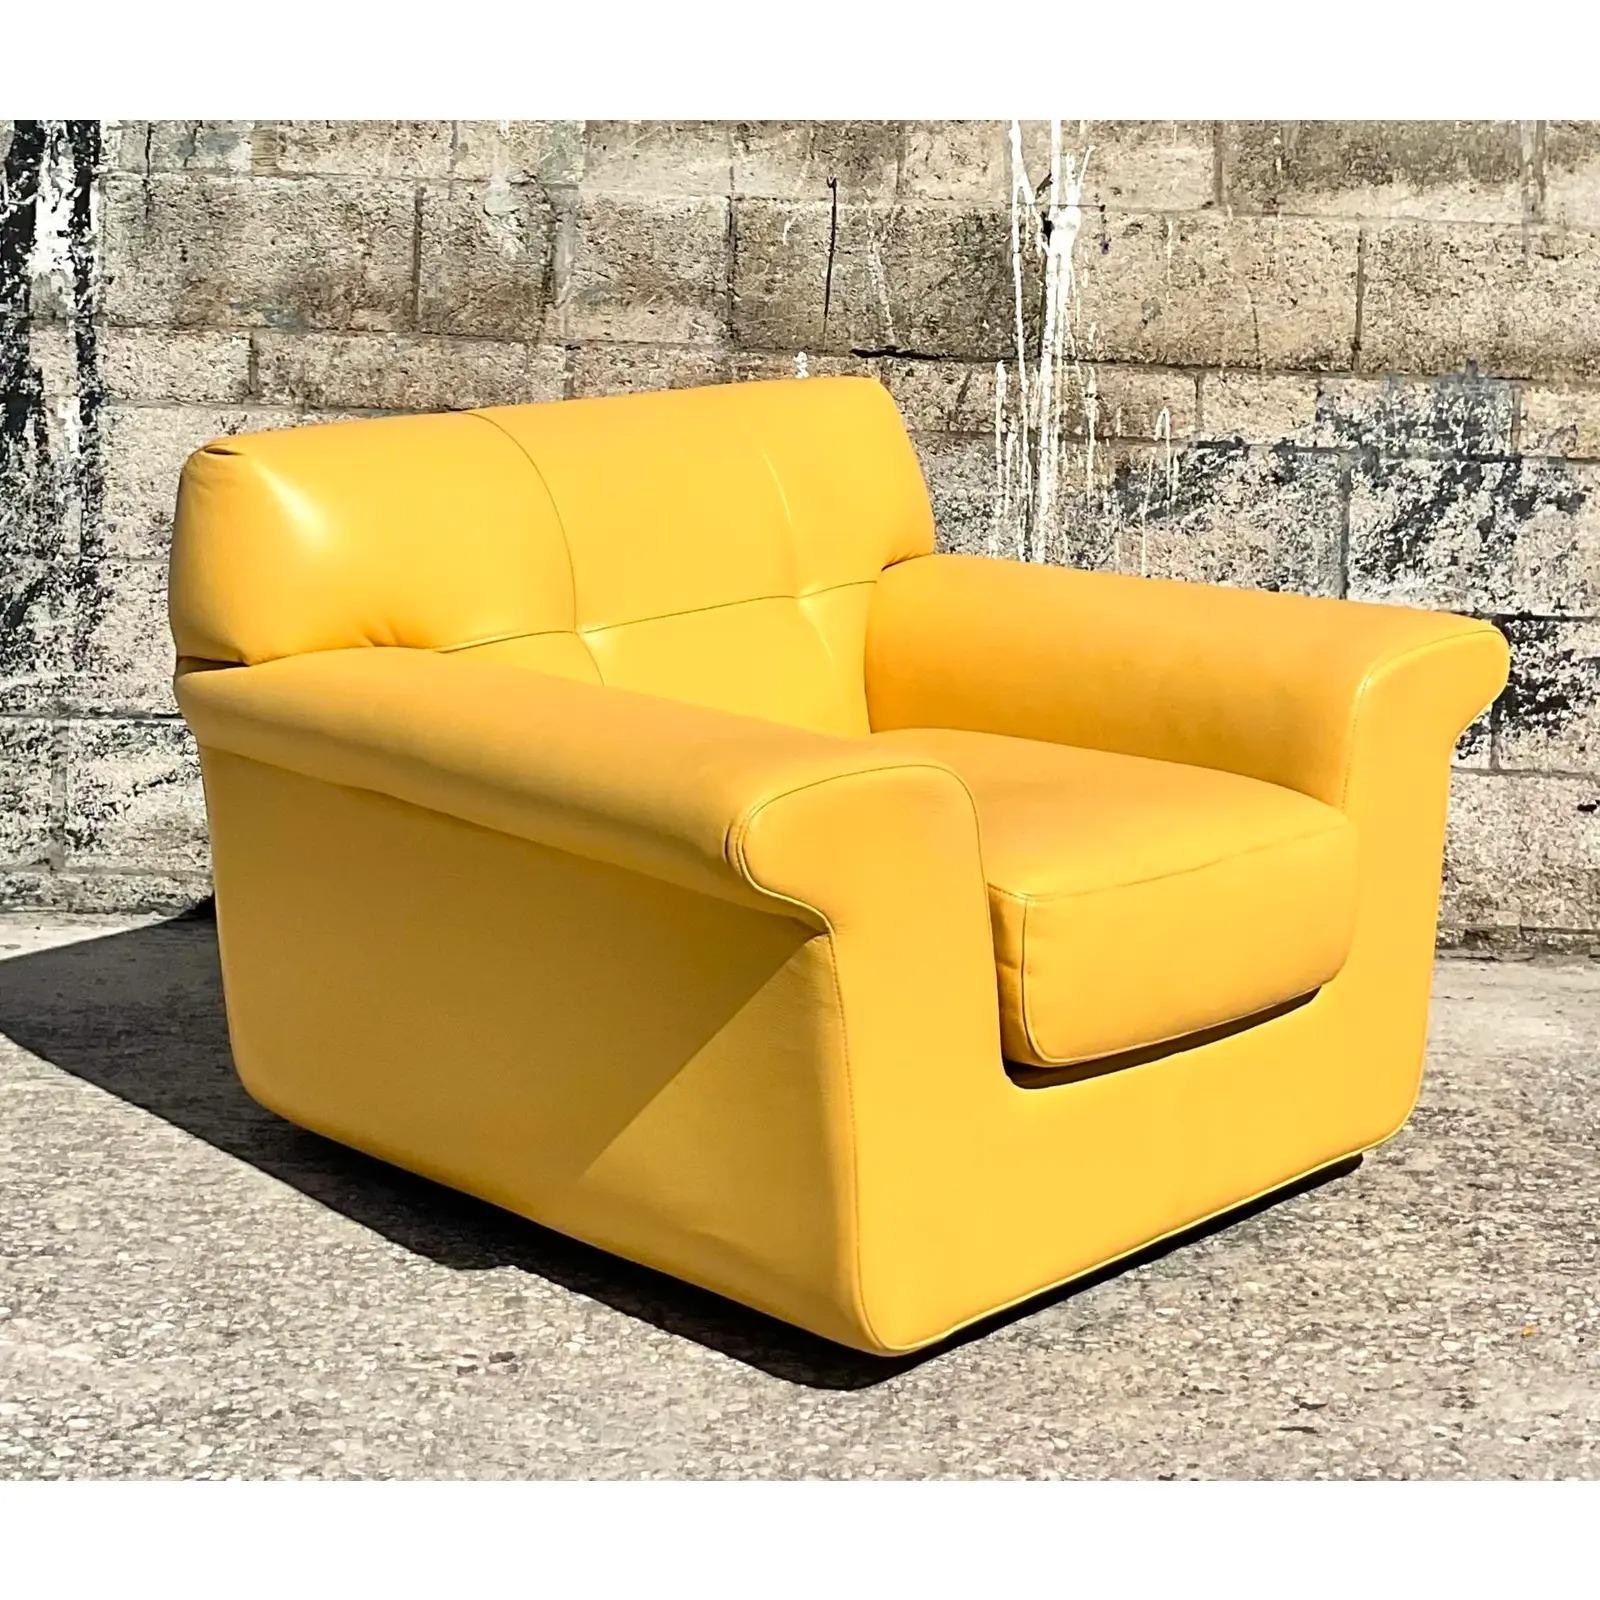 Fantastic vintage bright yellow leather chair. Made by the iconic American Leather. Beautiful Contemporary wide shape with a swivel base for extra relaxing. Tagged. Acquired from a Palm Beach estate.